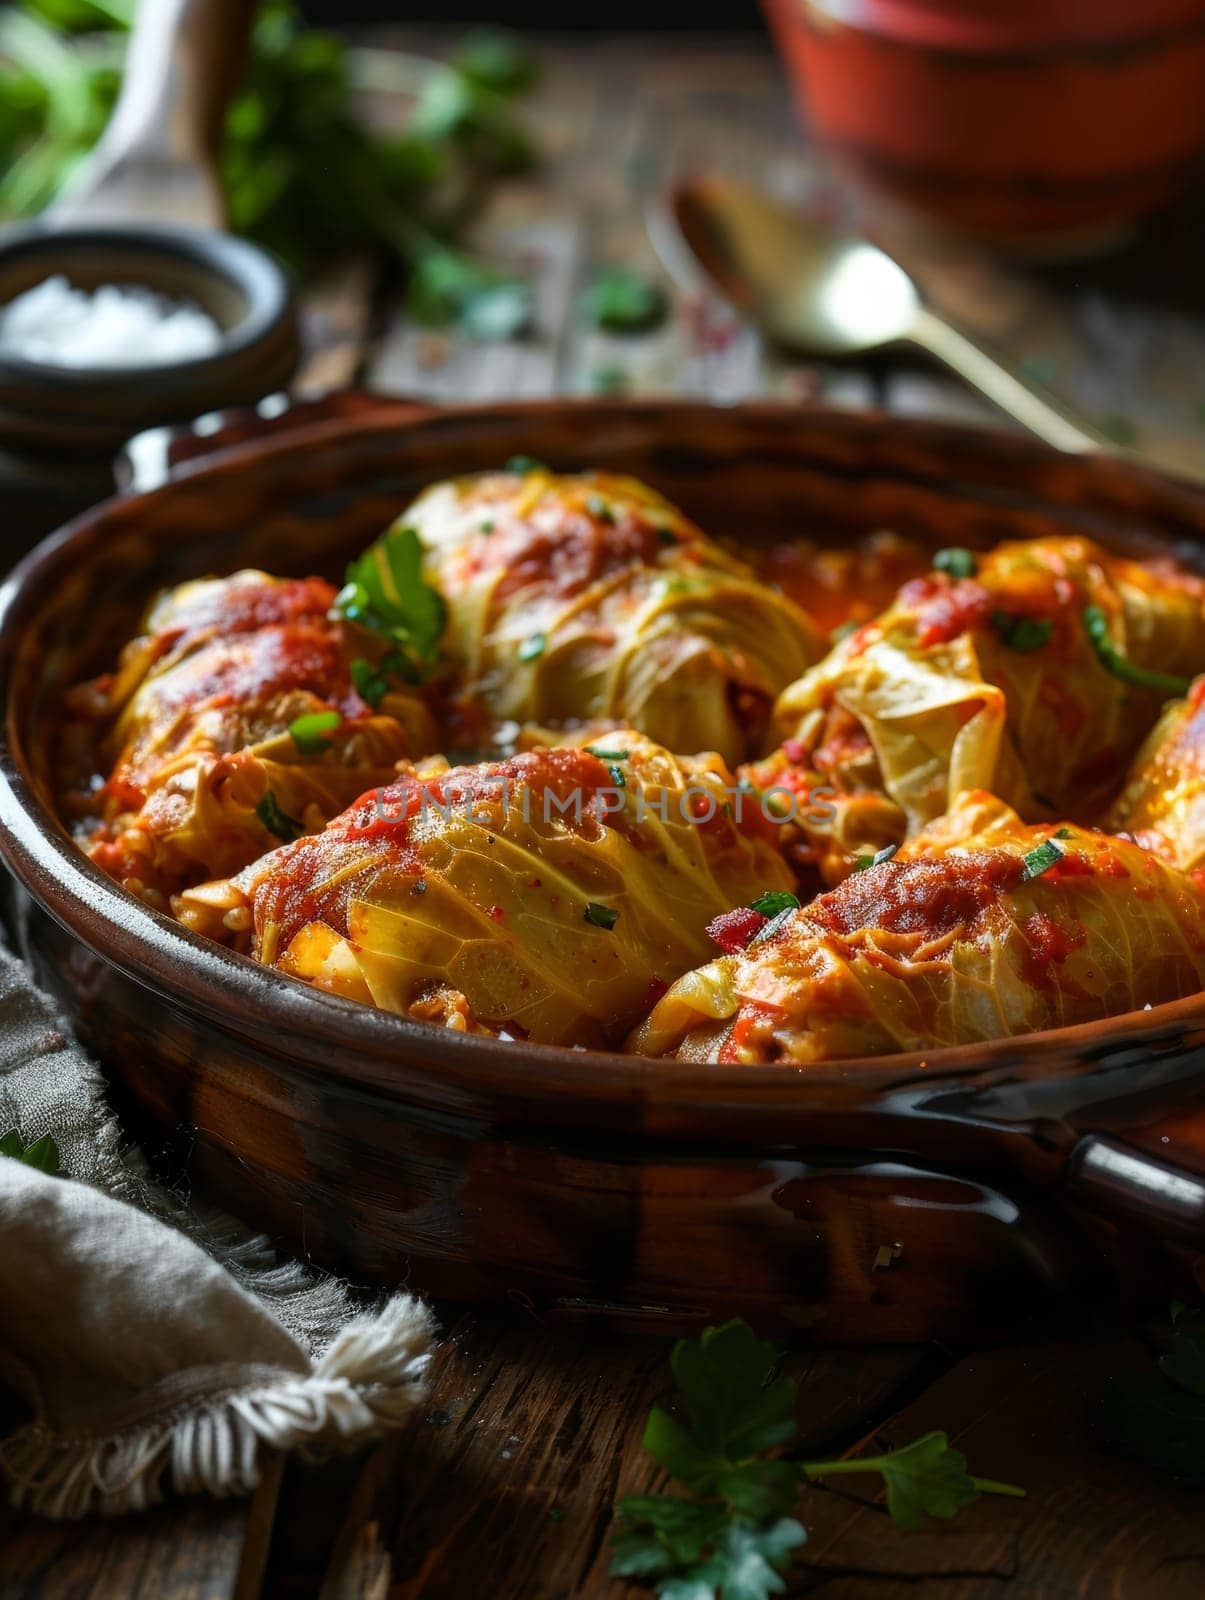 Traditional Romanian sarmale, or cabbage rolls stuffed with minced meat and rice, served in a rustic clay dish. This savory ethnic dish showcases the rich culinary heritage Romanian cuisine